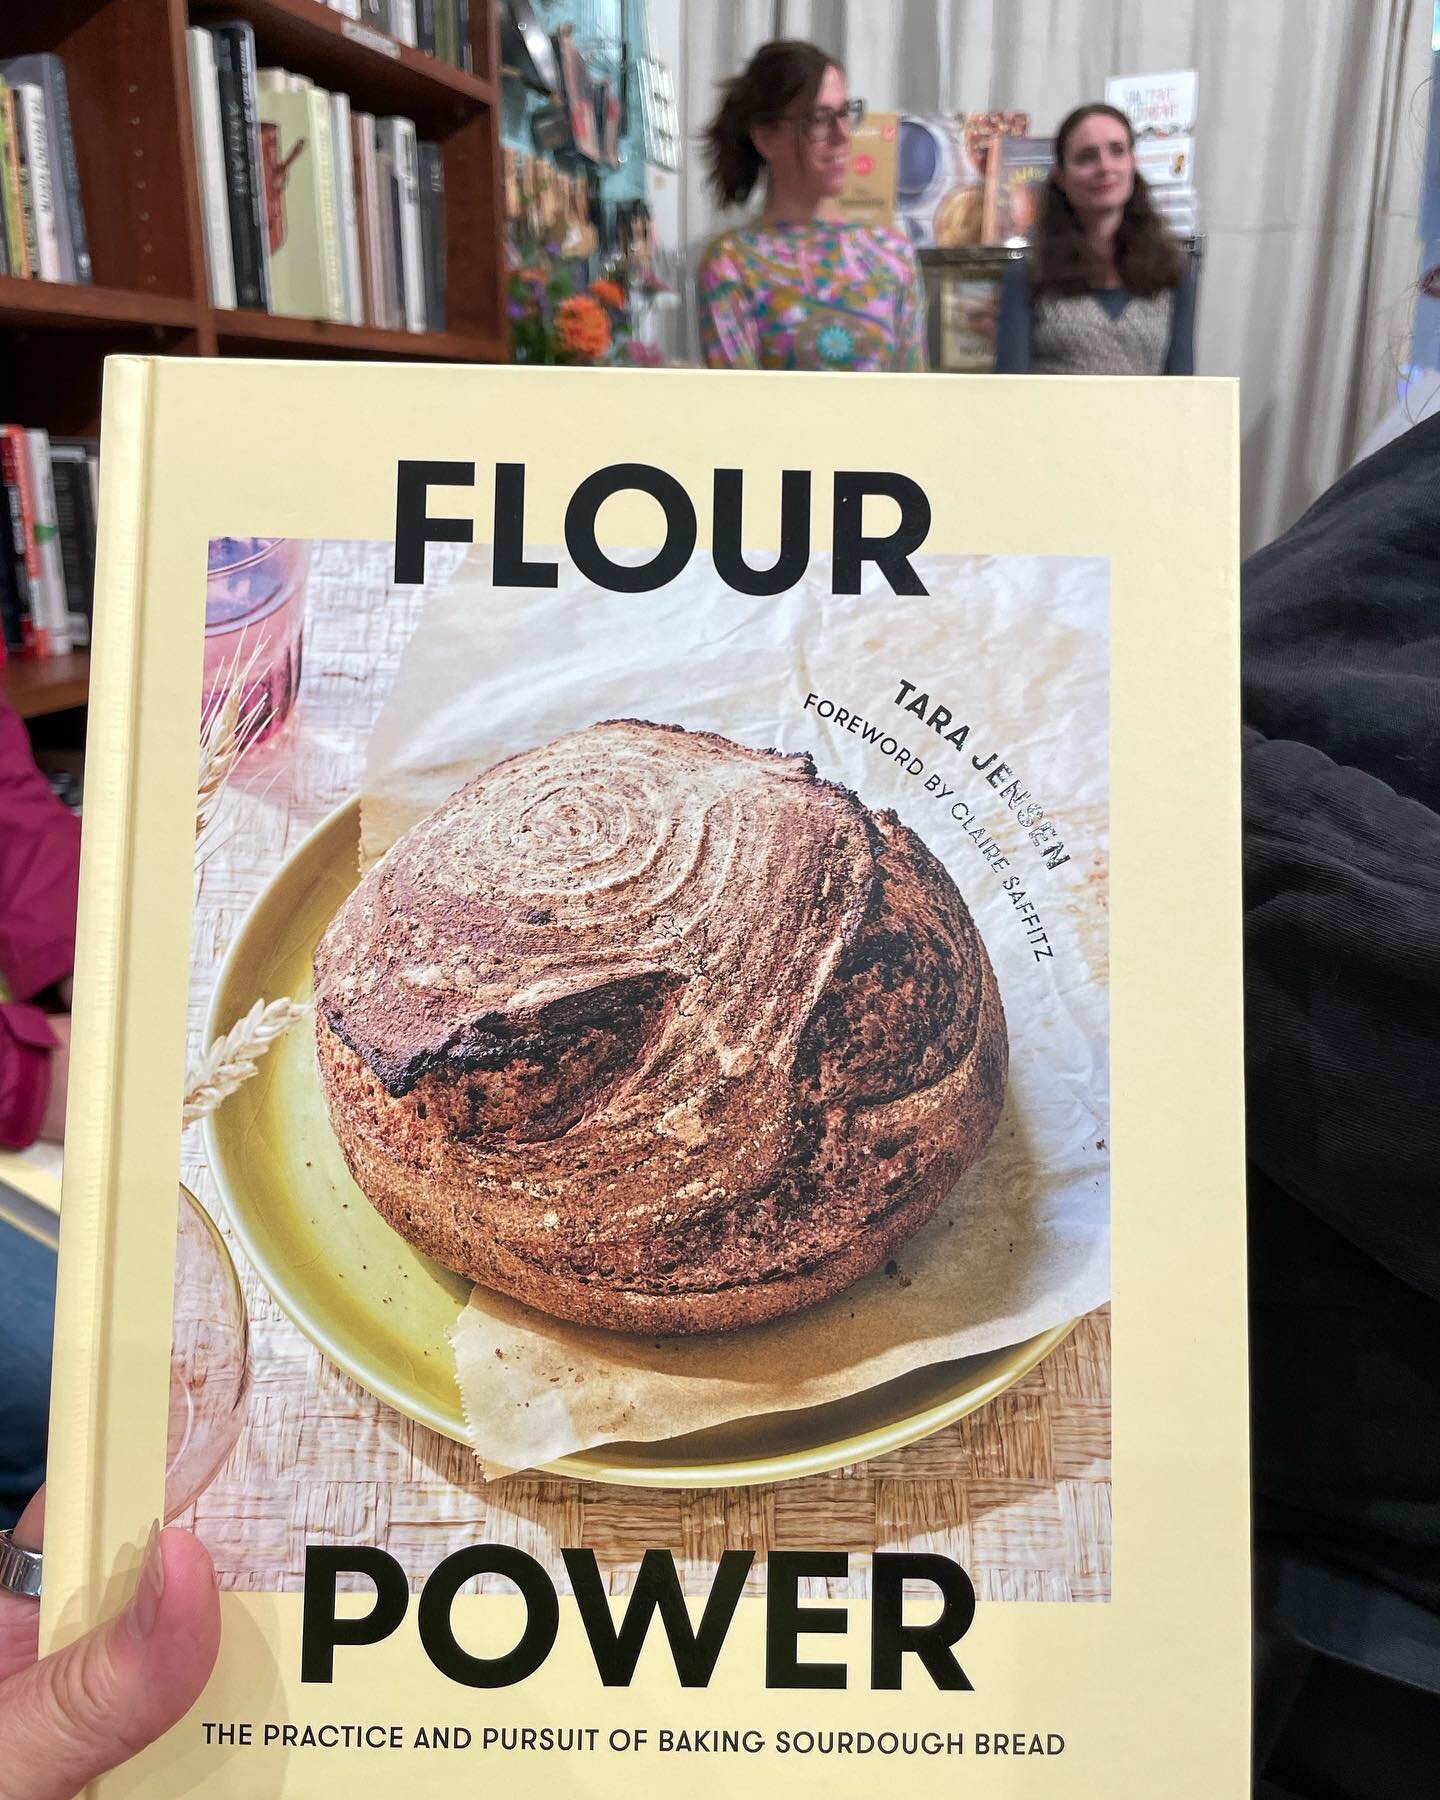 At @boldforkbooks for @bakerhands book launch! Interviewed by Jessica from famed @seyloubakery #sourdough #bread #bake #shoplocal